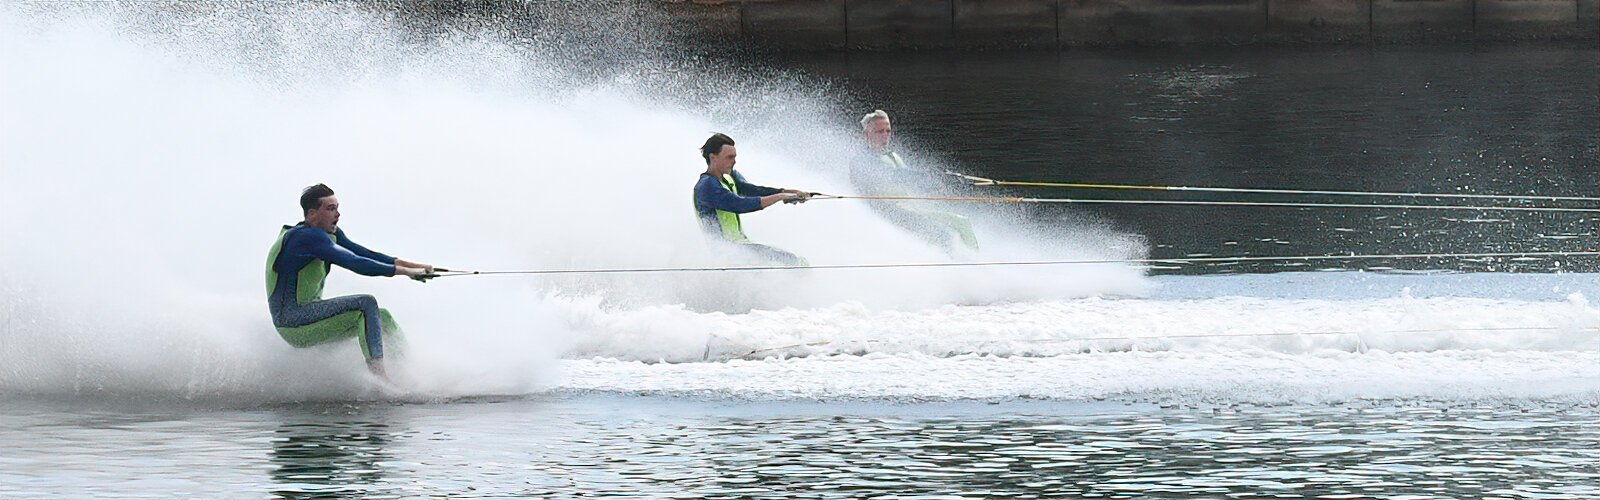 The Tampa Bay Water Ski Show Team entertains spectators with some nifty maneuvers during the May 4th Tampa Riverfest at Water Works Park.